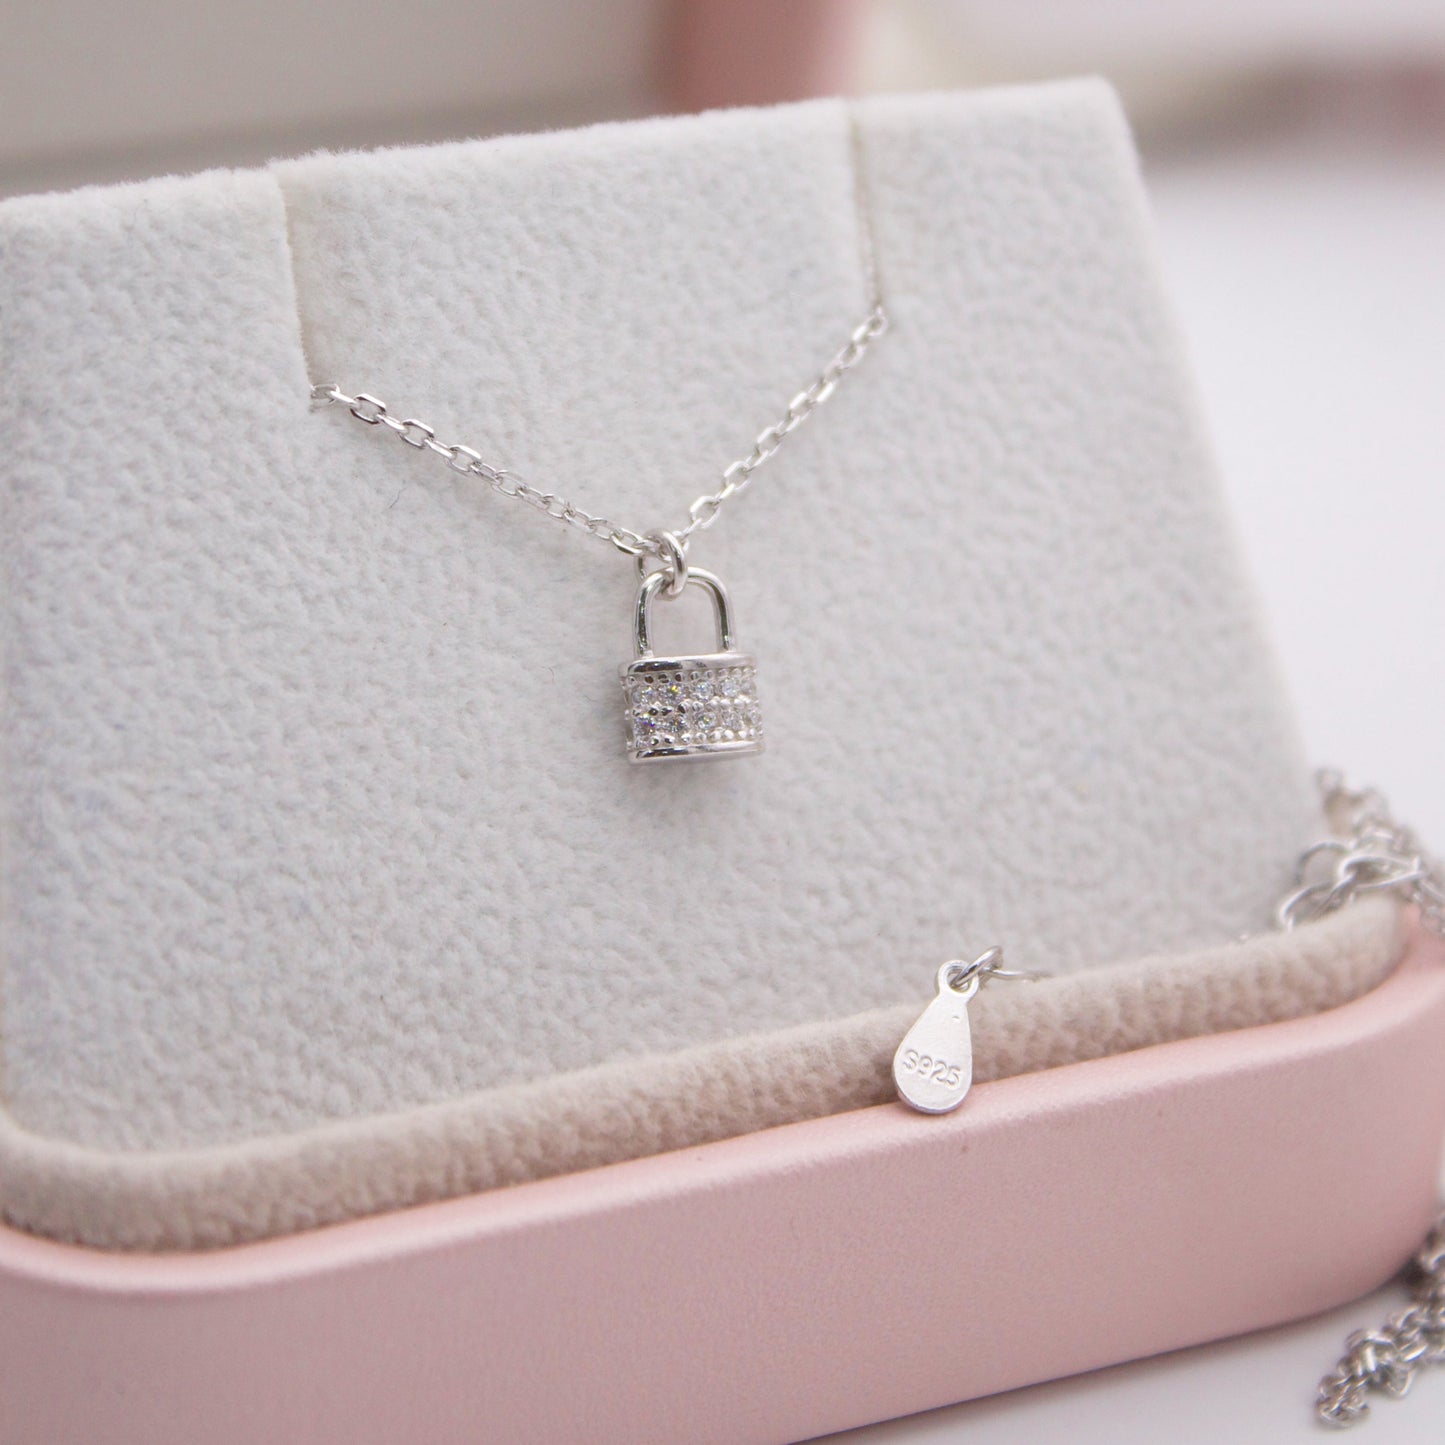 Finlee Lock Silver Necklace